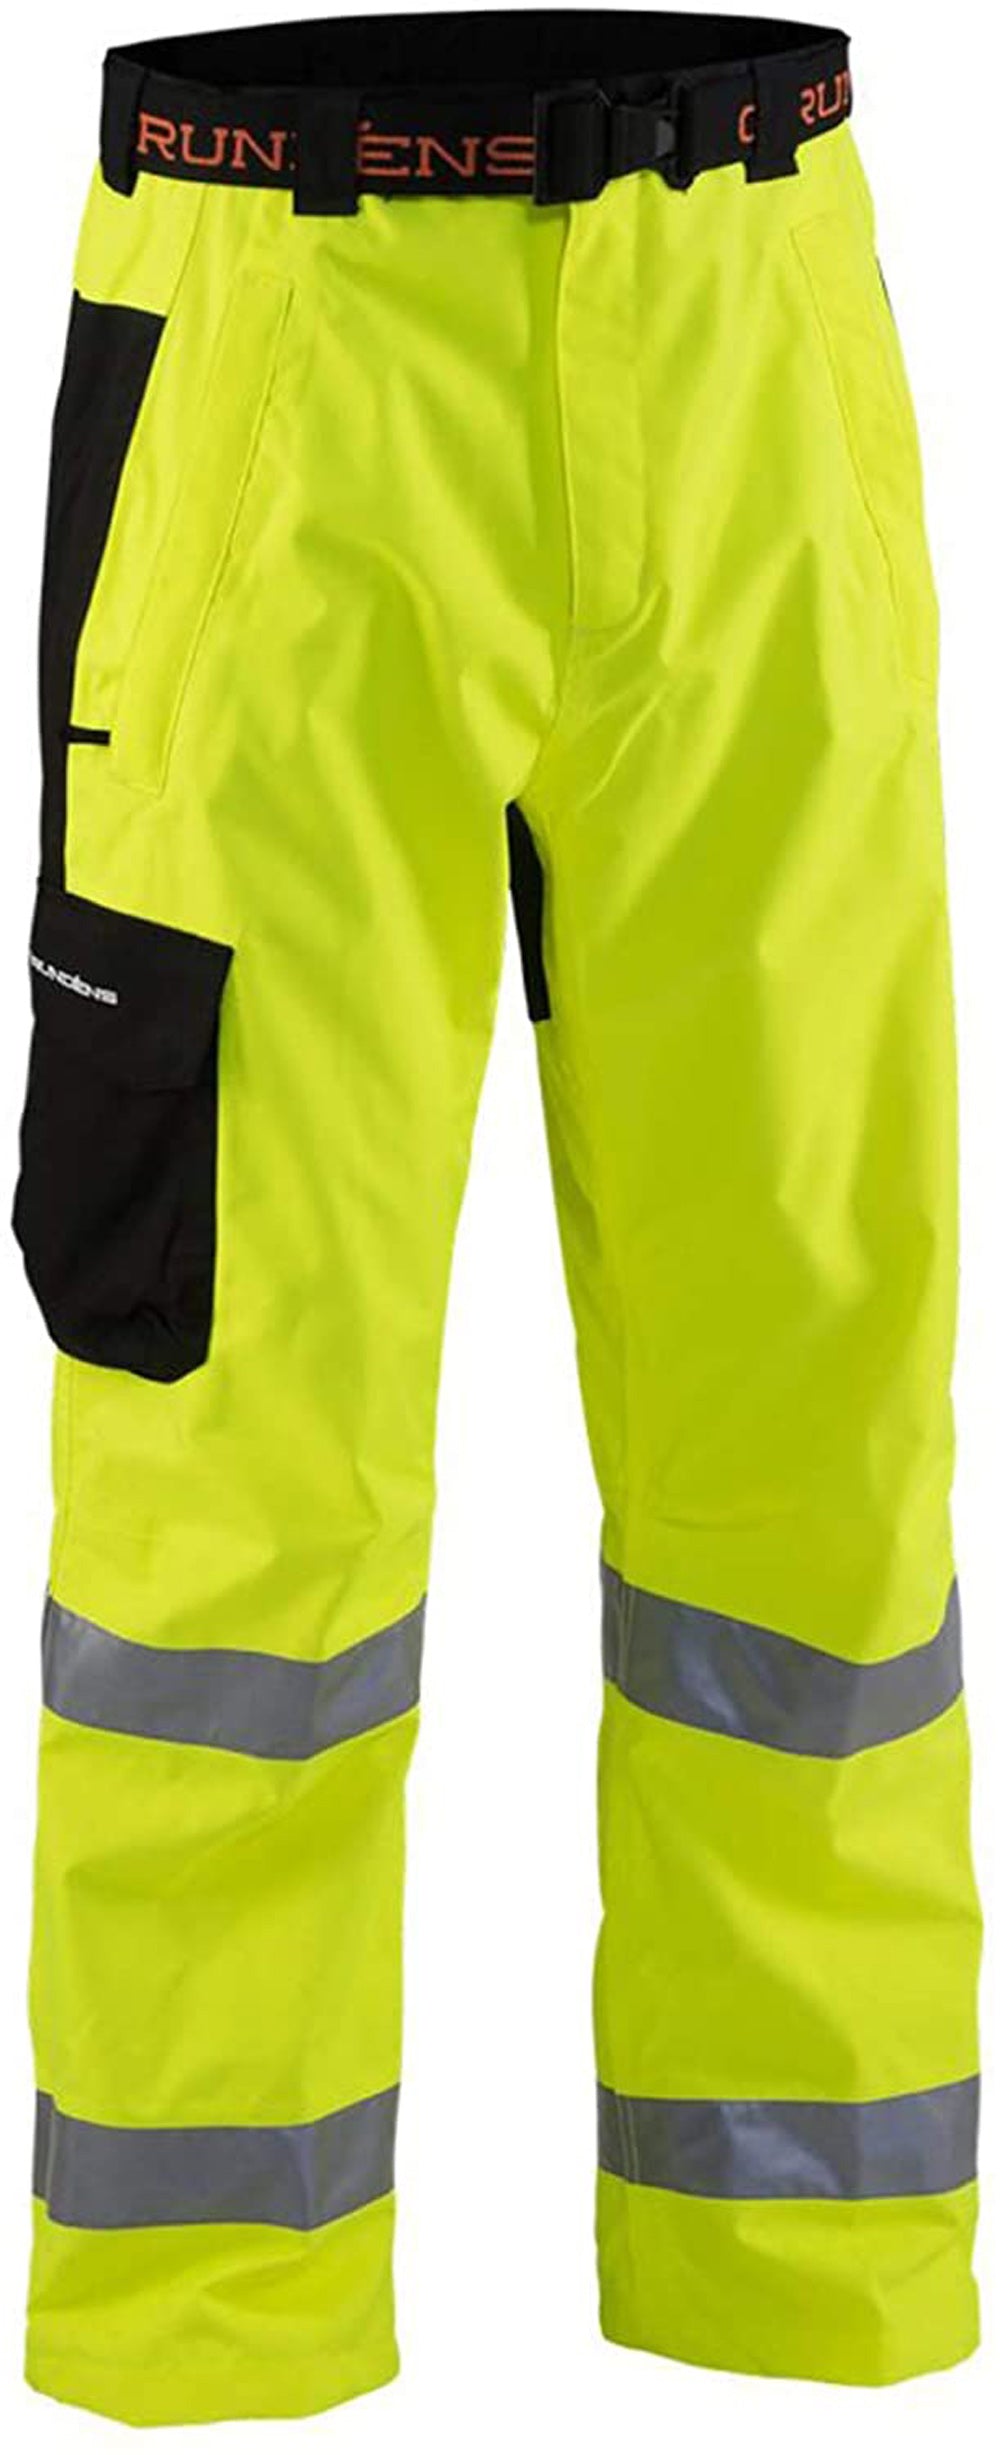 Weather Watch Pant in Reflective Yellow color